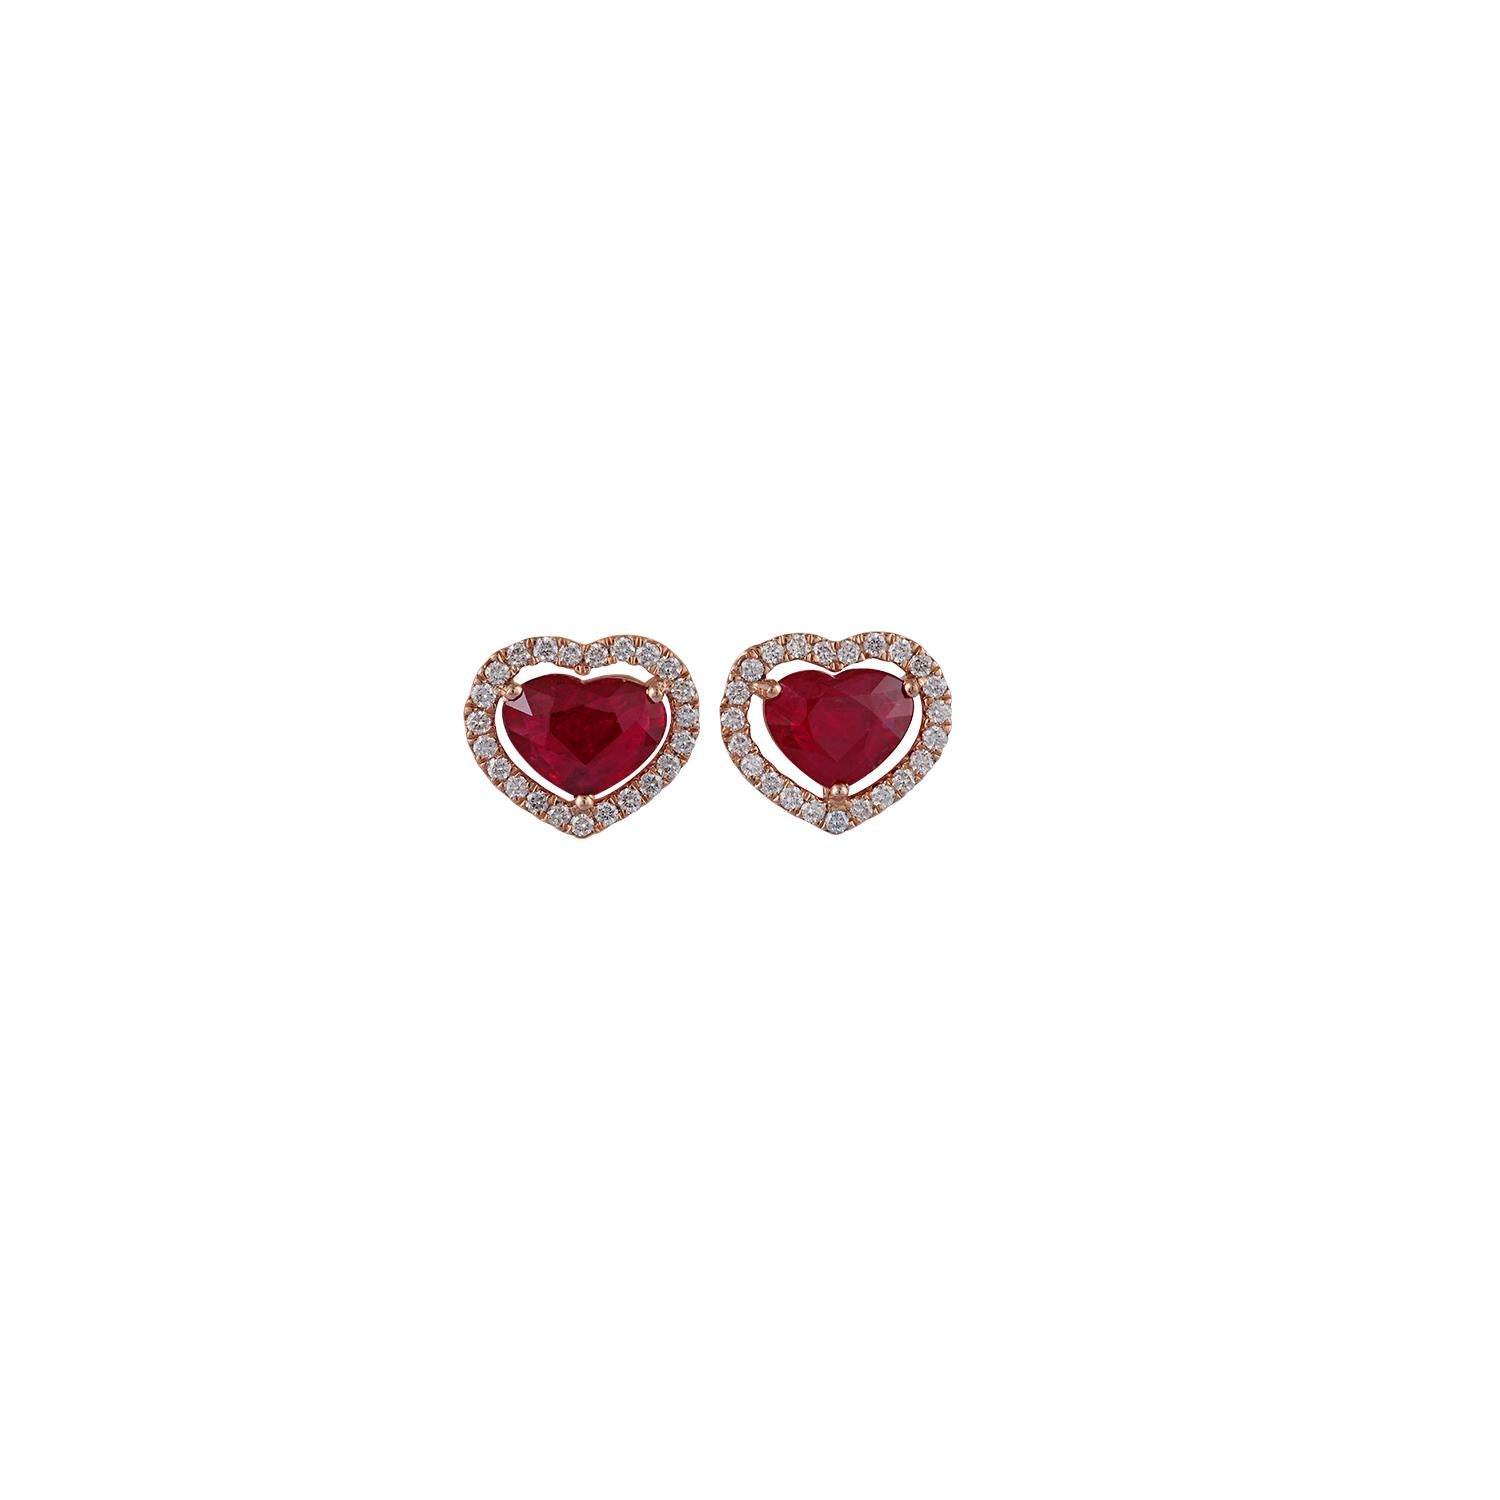 Contemporary Heart Shaped Ruby Diamond Earring Studded in 18 Karat Rose Gold